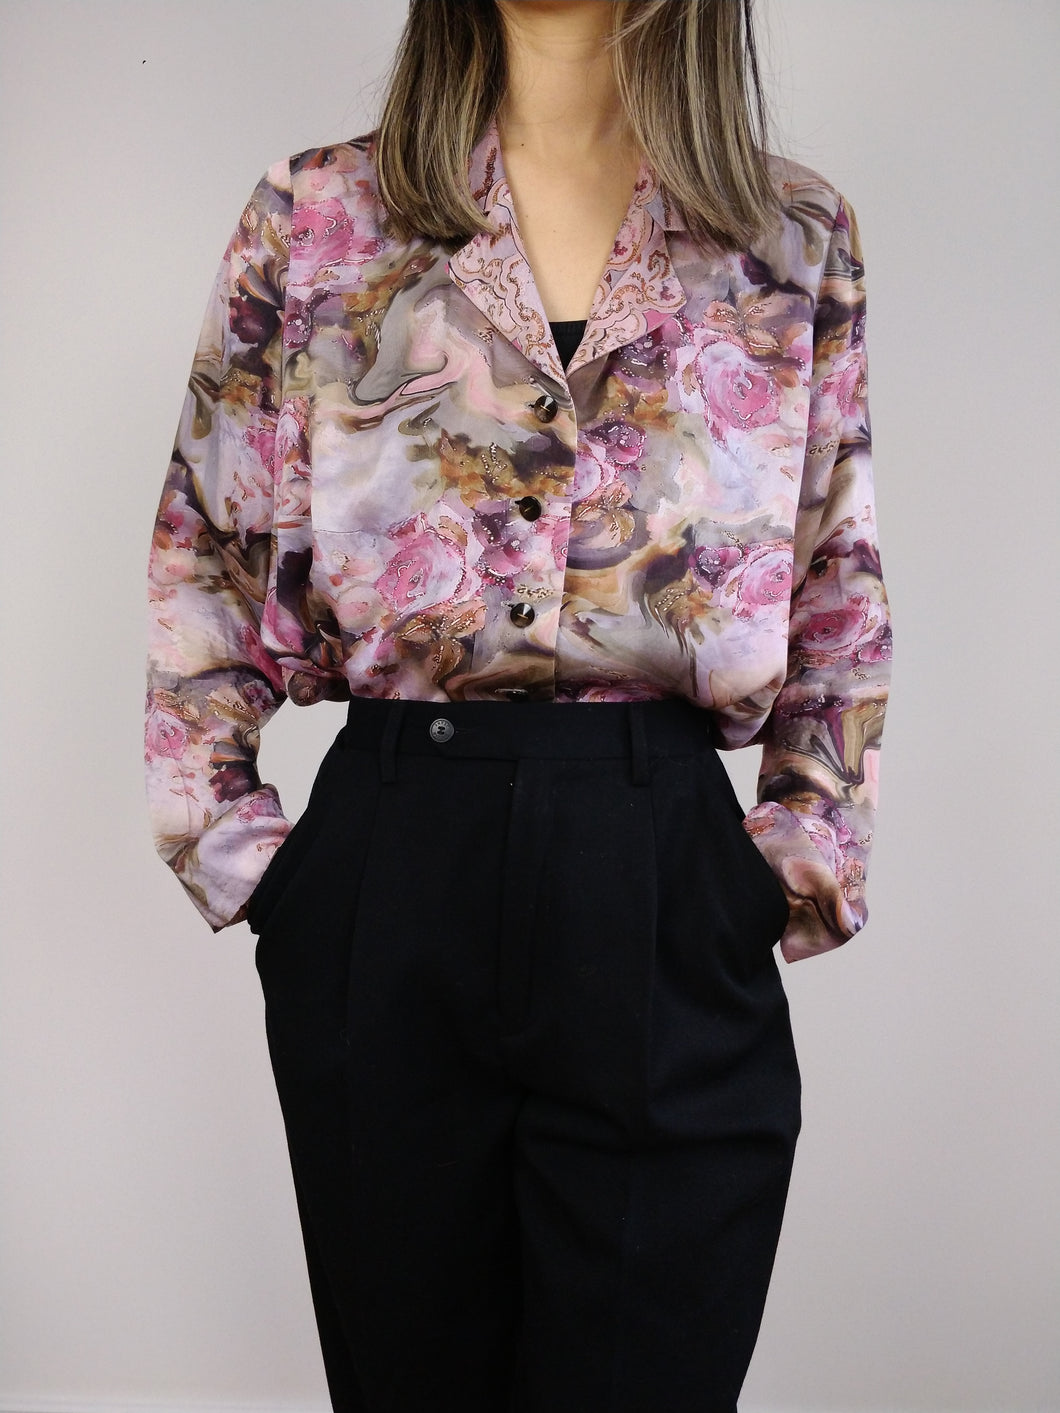 The Pink Dream Blouse | Vintage shirt crazy pattern shiny smooth satin long sleeve M